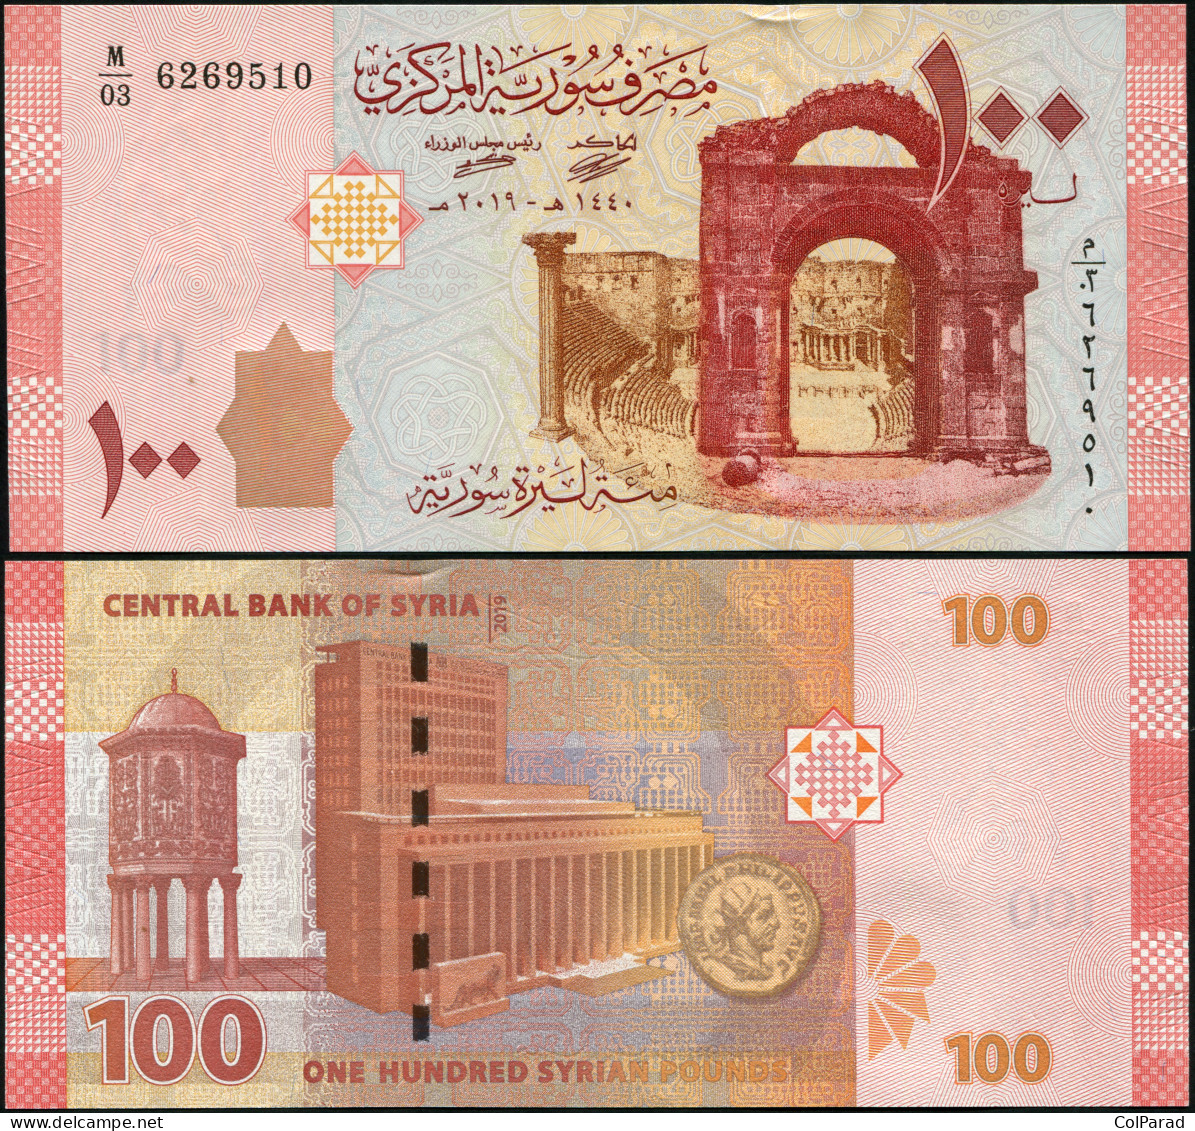 SYRIA 100 SYRIAN POUNDS - 2019 - Paper Unc - P.NL Banknote - Syrië